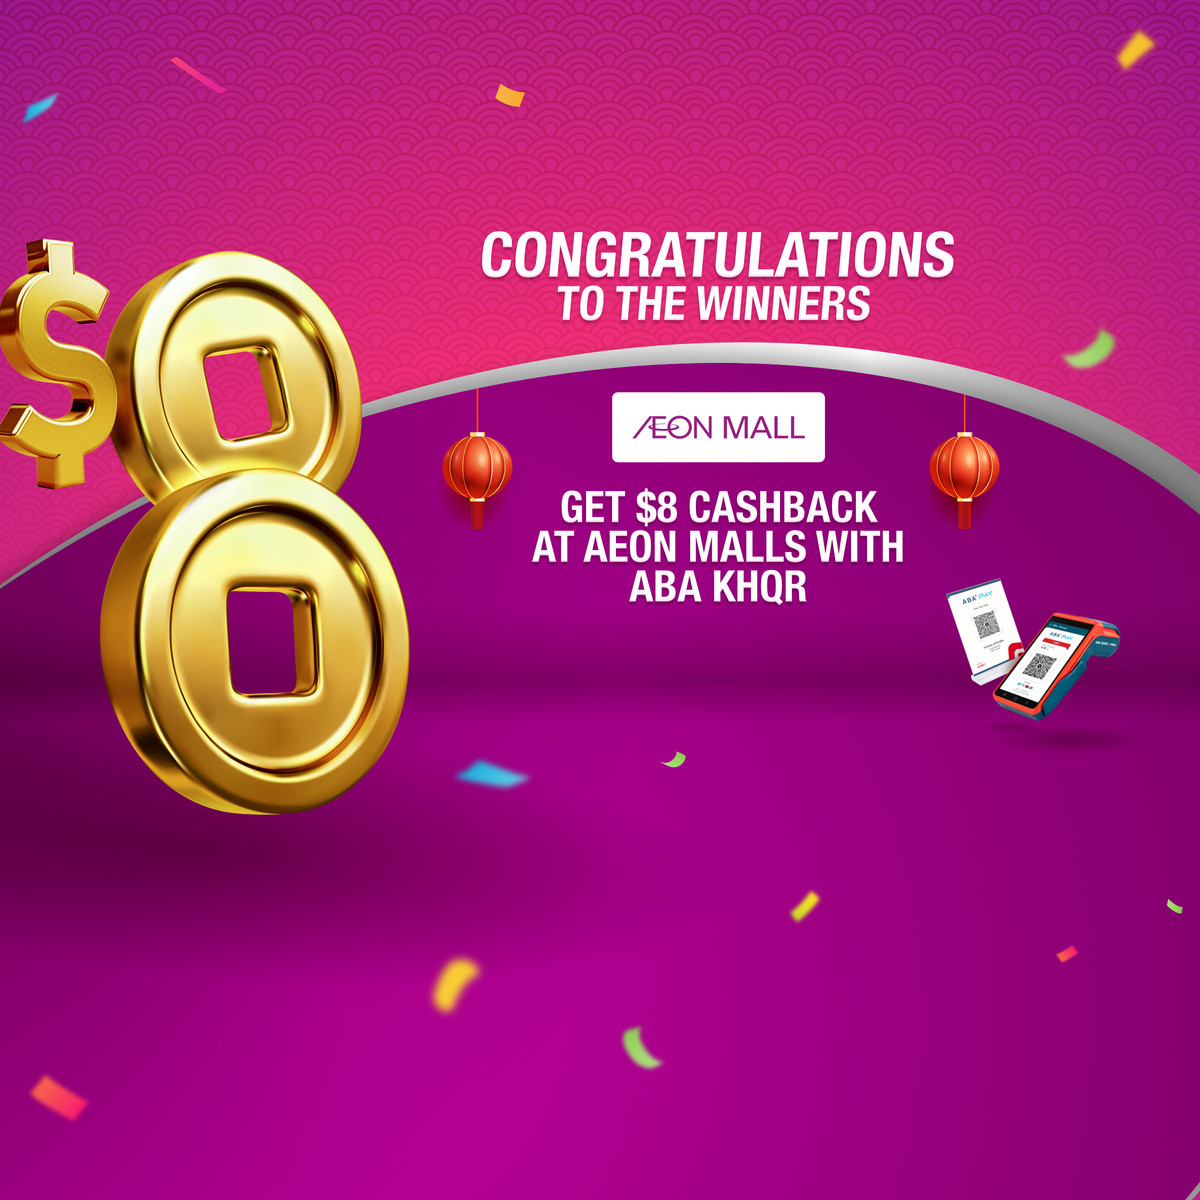 Congratulations​ to​ all​ the​ winners​ of​ the​ “Get​ $8​ cashback​ at​ AEON​ Malls​ with​ ABA​ KHQR”​ promotion